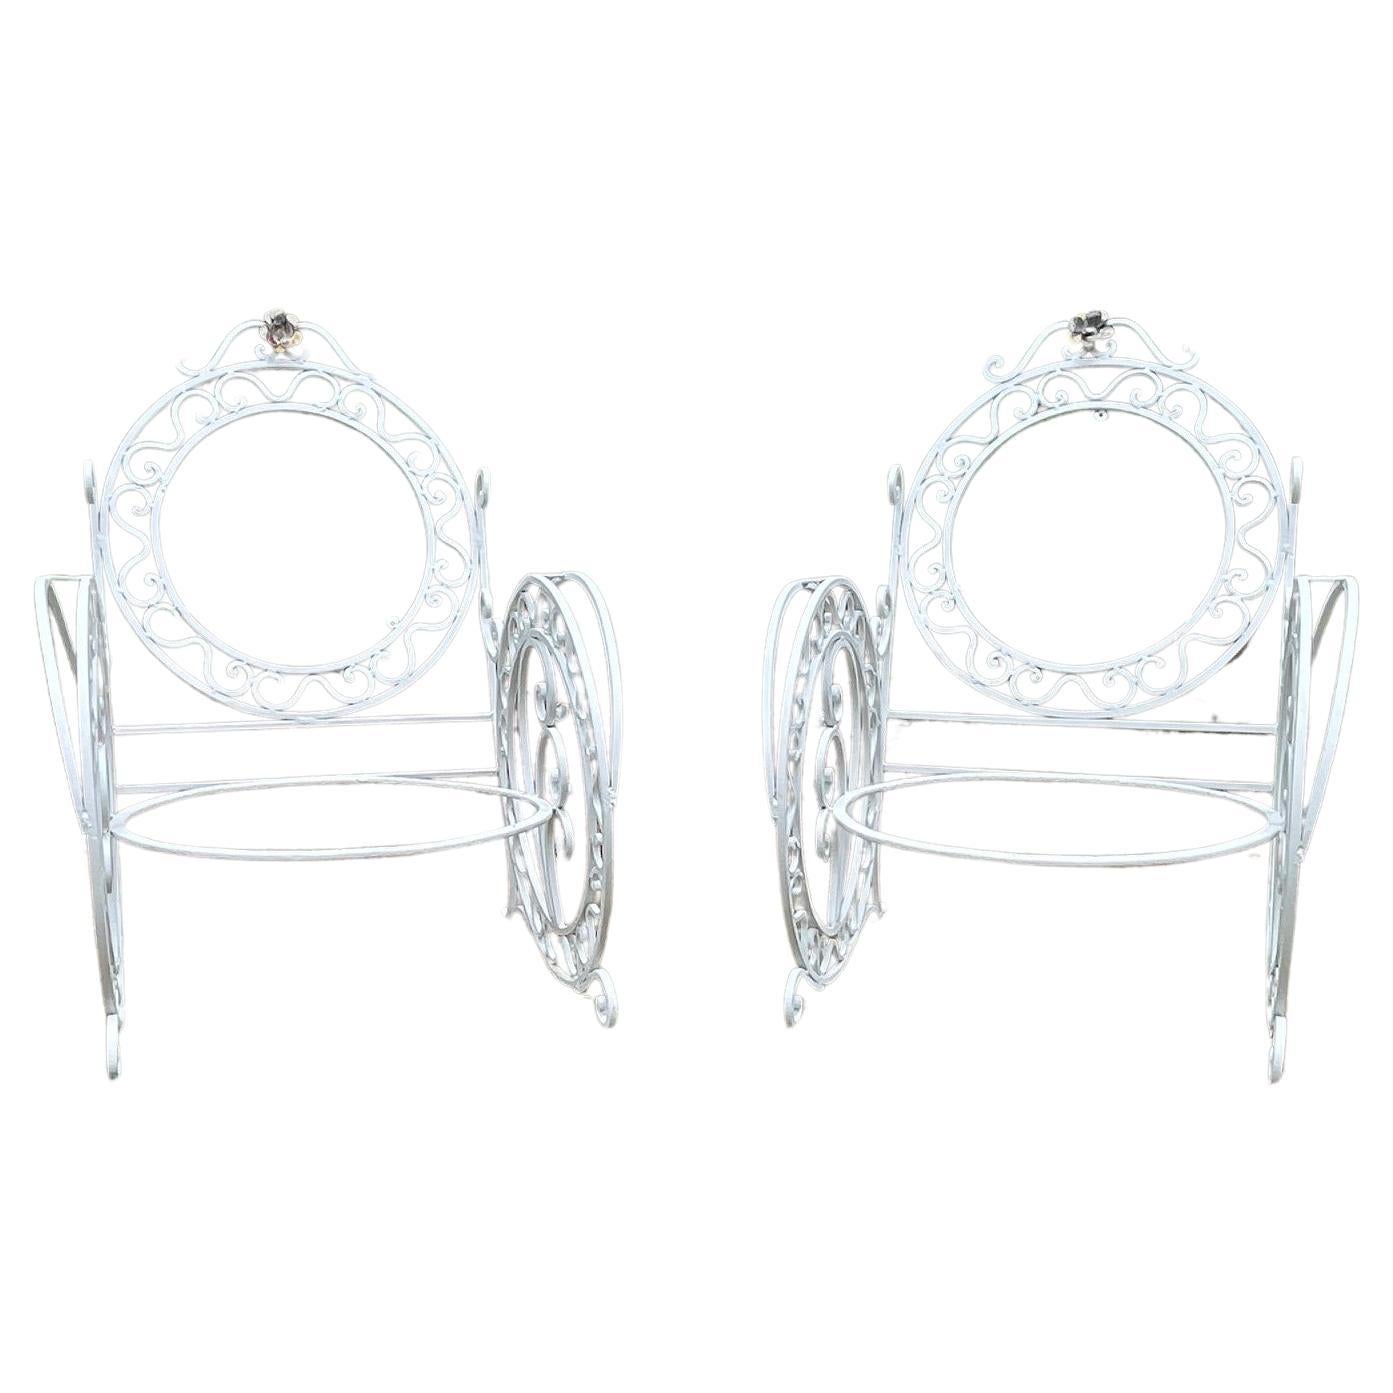 Late 19th Century Wrought Iron French Chairs - a Pair For Sale